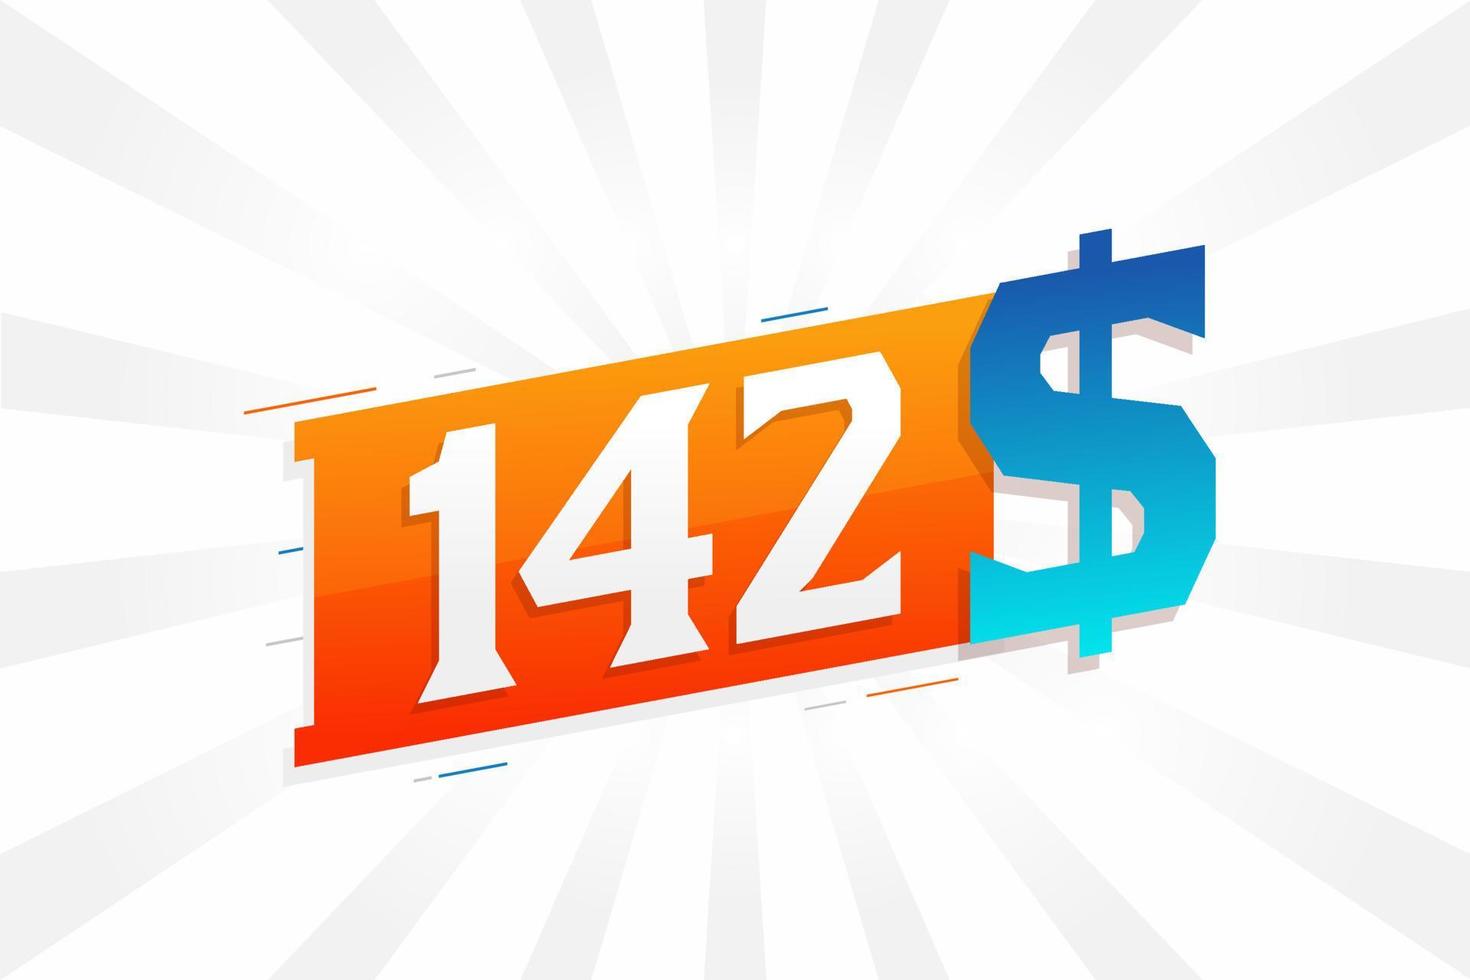 142 Dollar currency vector text symbol. 142 USD United States Dollar American Money stock vector